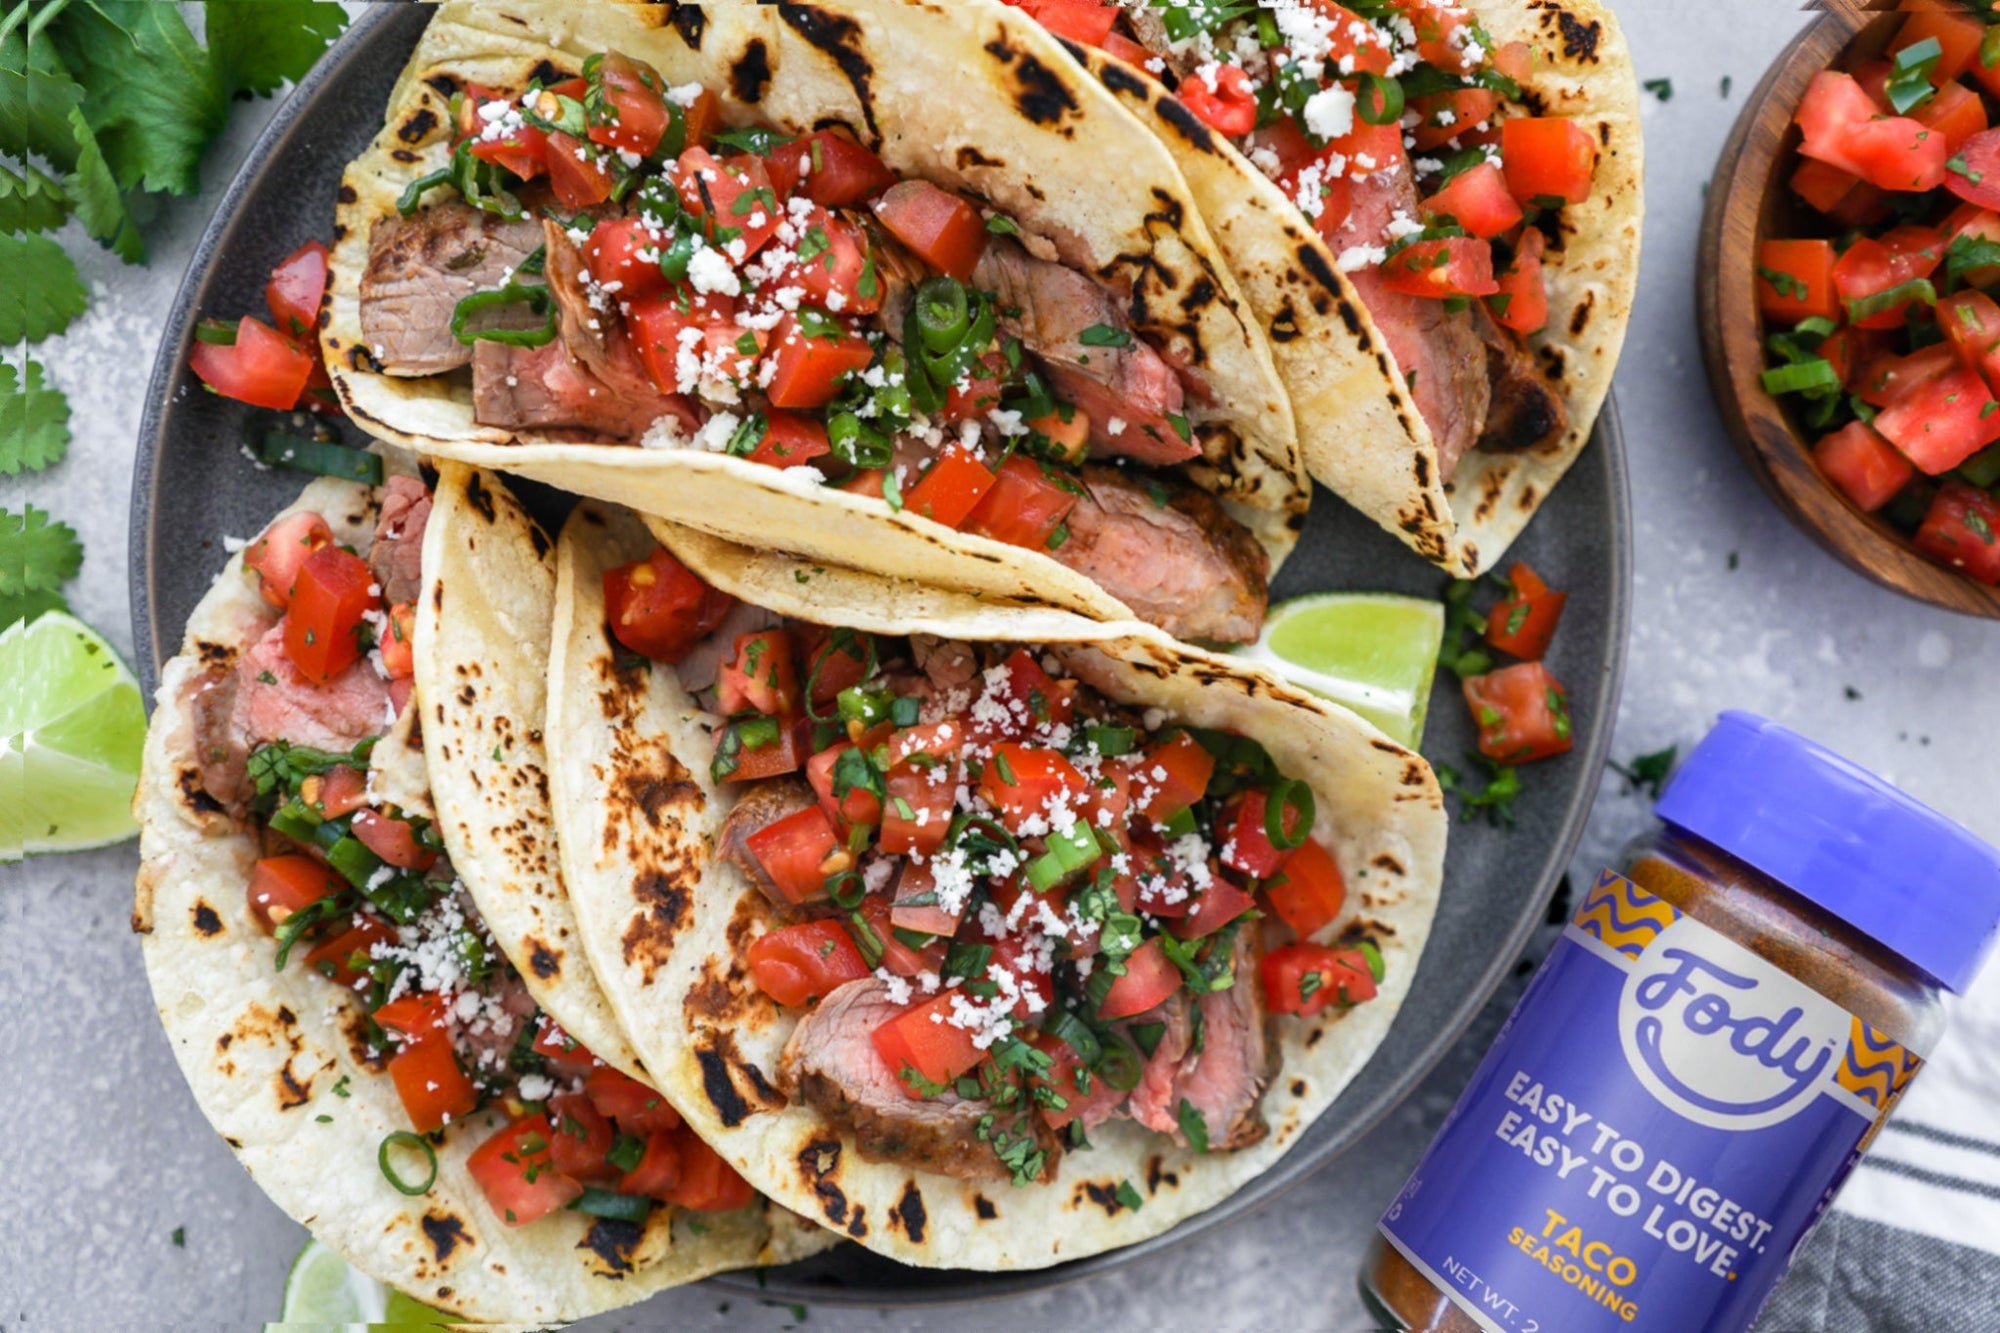 An image of Fody's grilled steak tacos with pico de gallo laid out on a plate beside a bottle of Fody's taco seasoning.